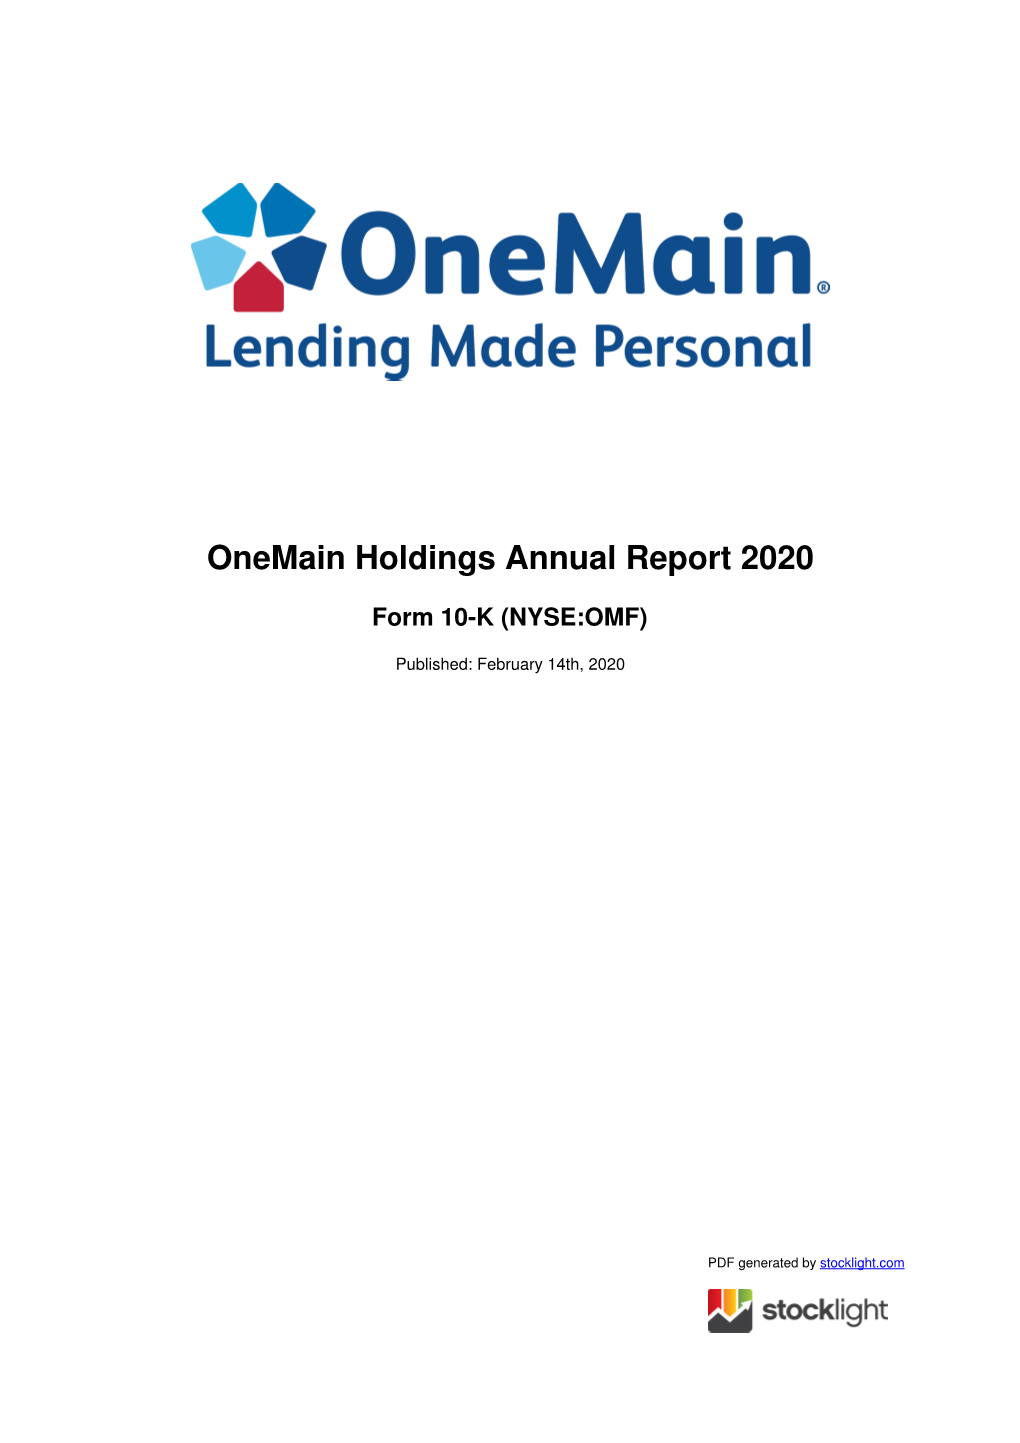 Onemain Holdings Annual Report 2020